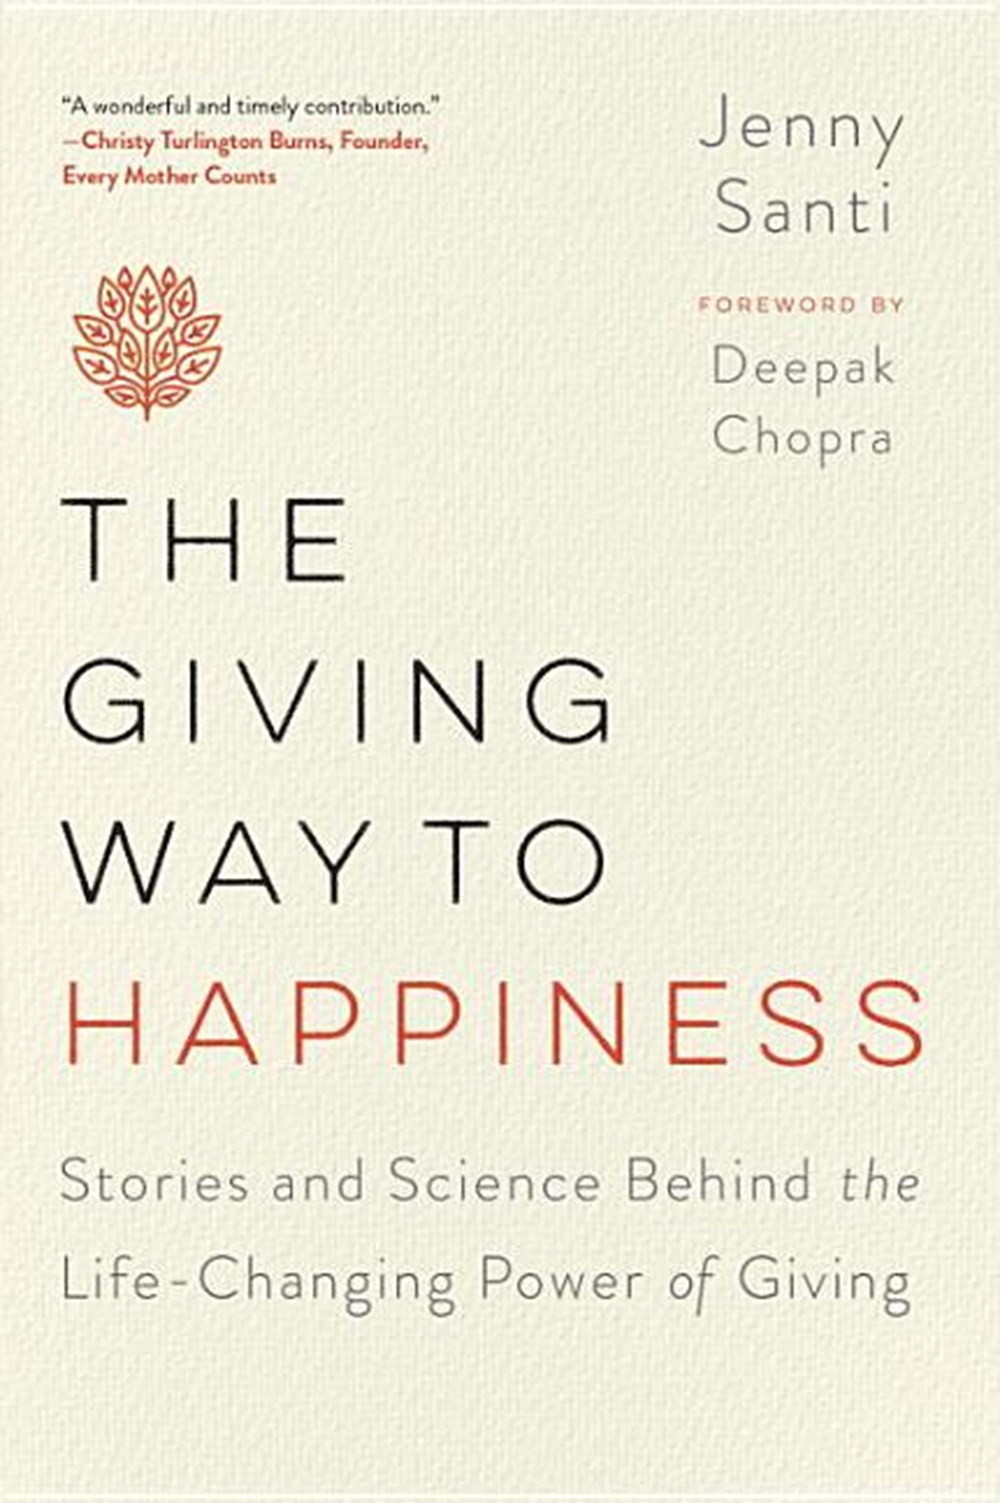 Giving Way to Happiness Stories and Science Behind the Life-Changing Power of Giving